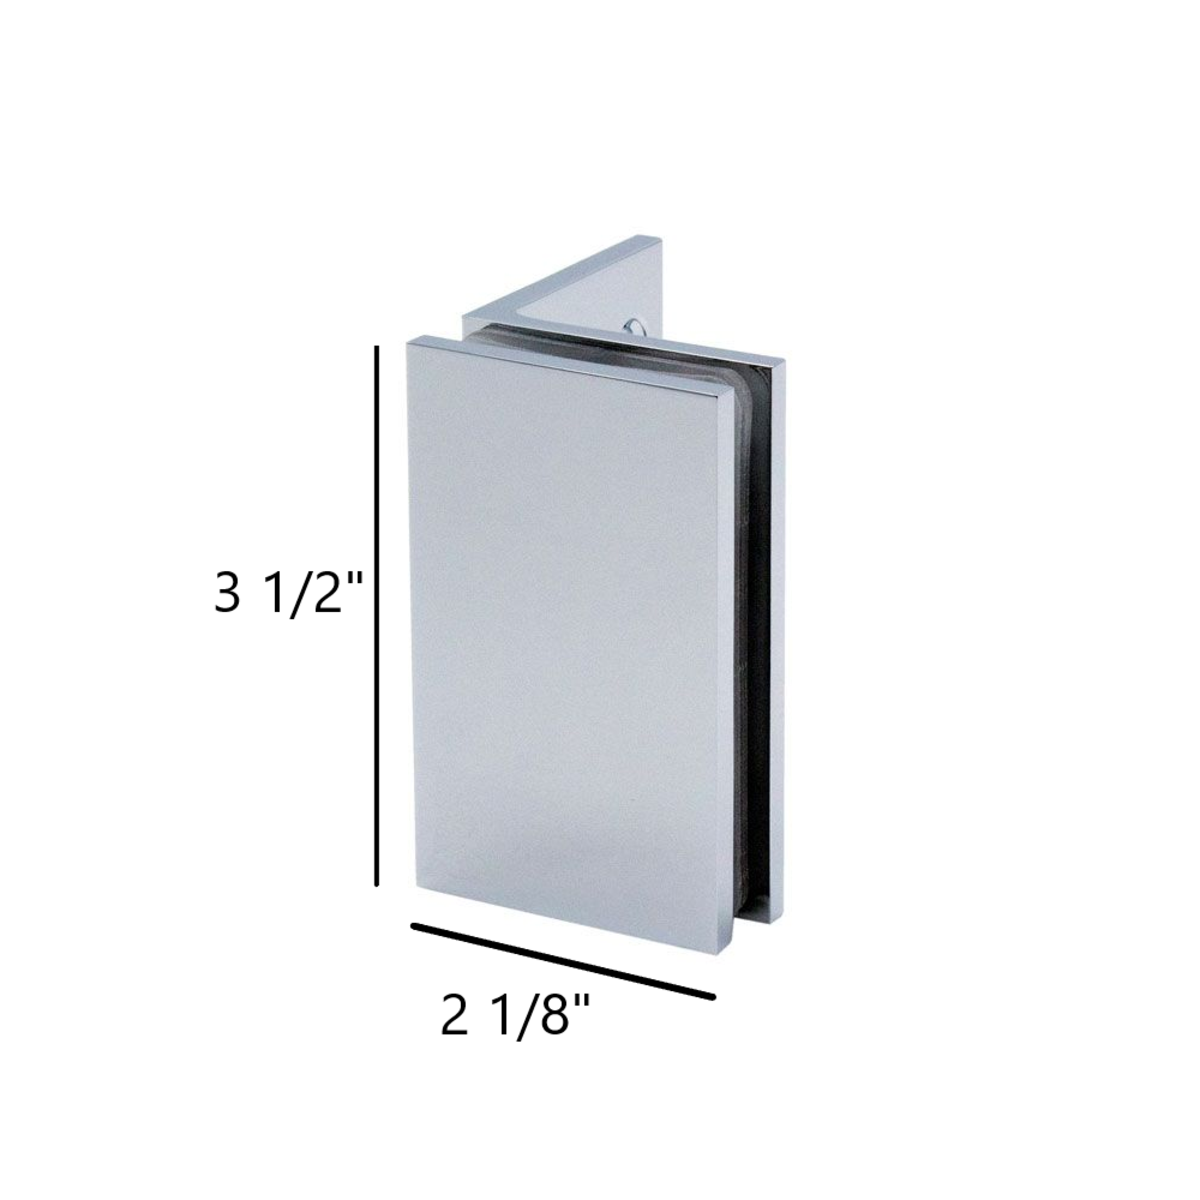 Heavy Duty 3 1/2" x 2 1/8" Square Edges Glass Clamp